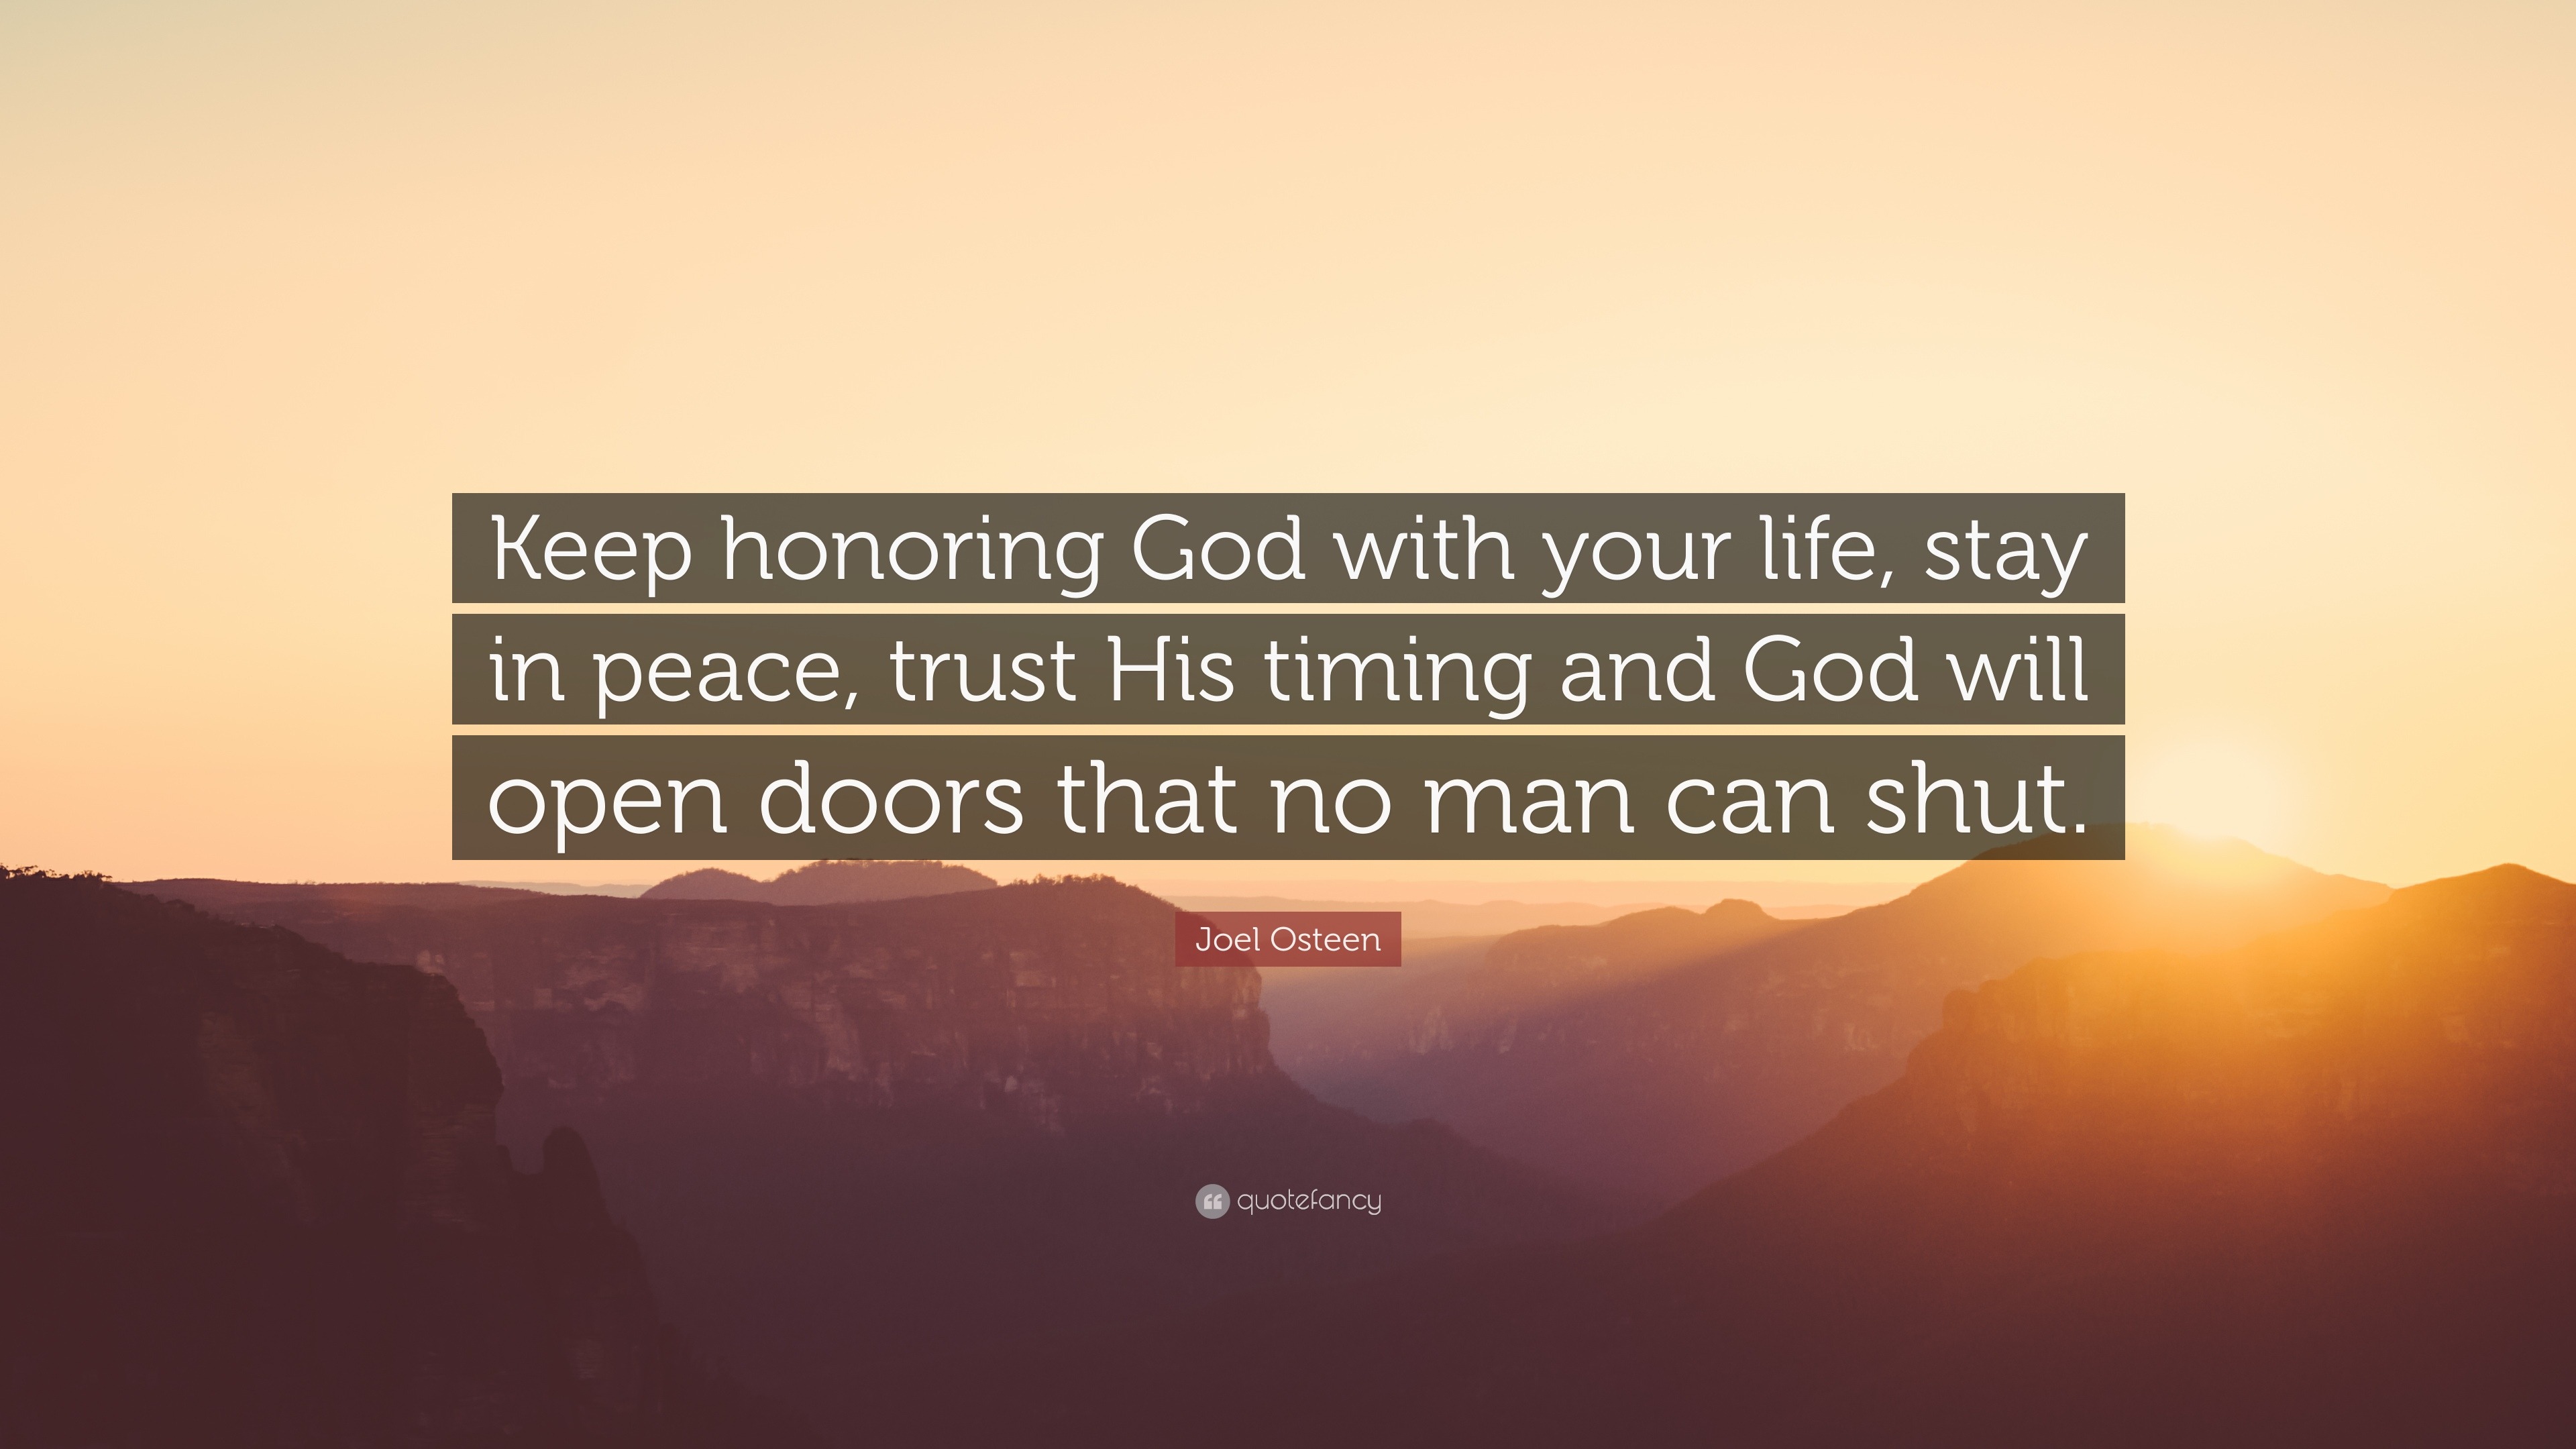 Joel Osteen Quote “Keep honoring God with your life, stay